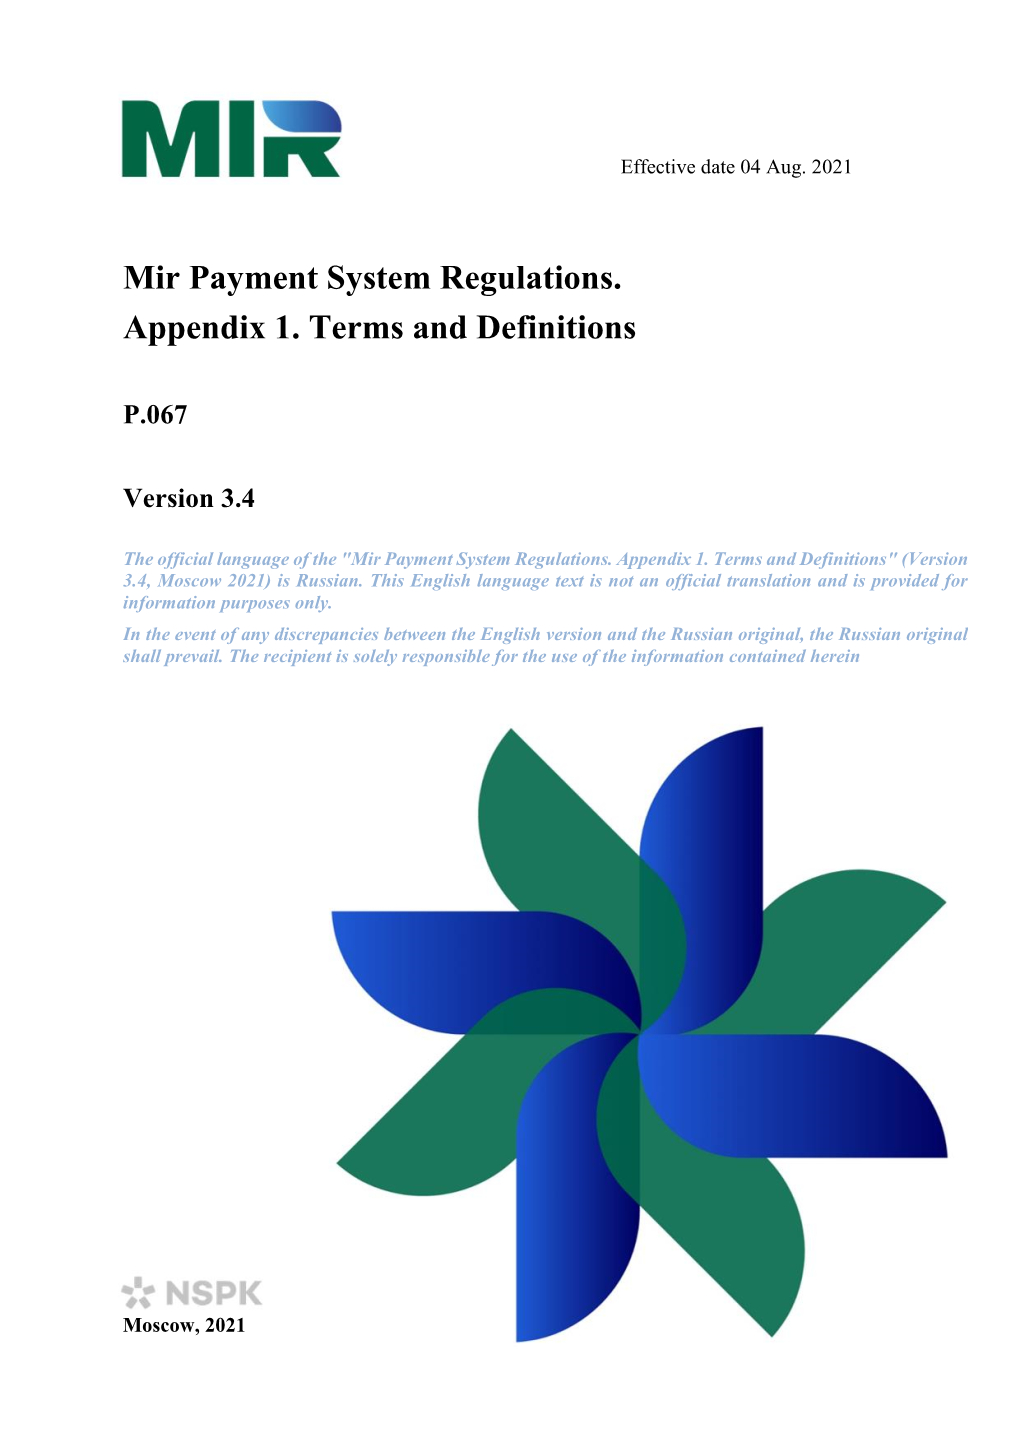 Mir Payment System Regulations. Appendix 1. Terms and Definitions